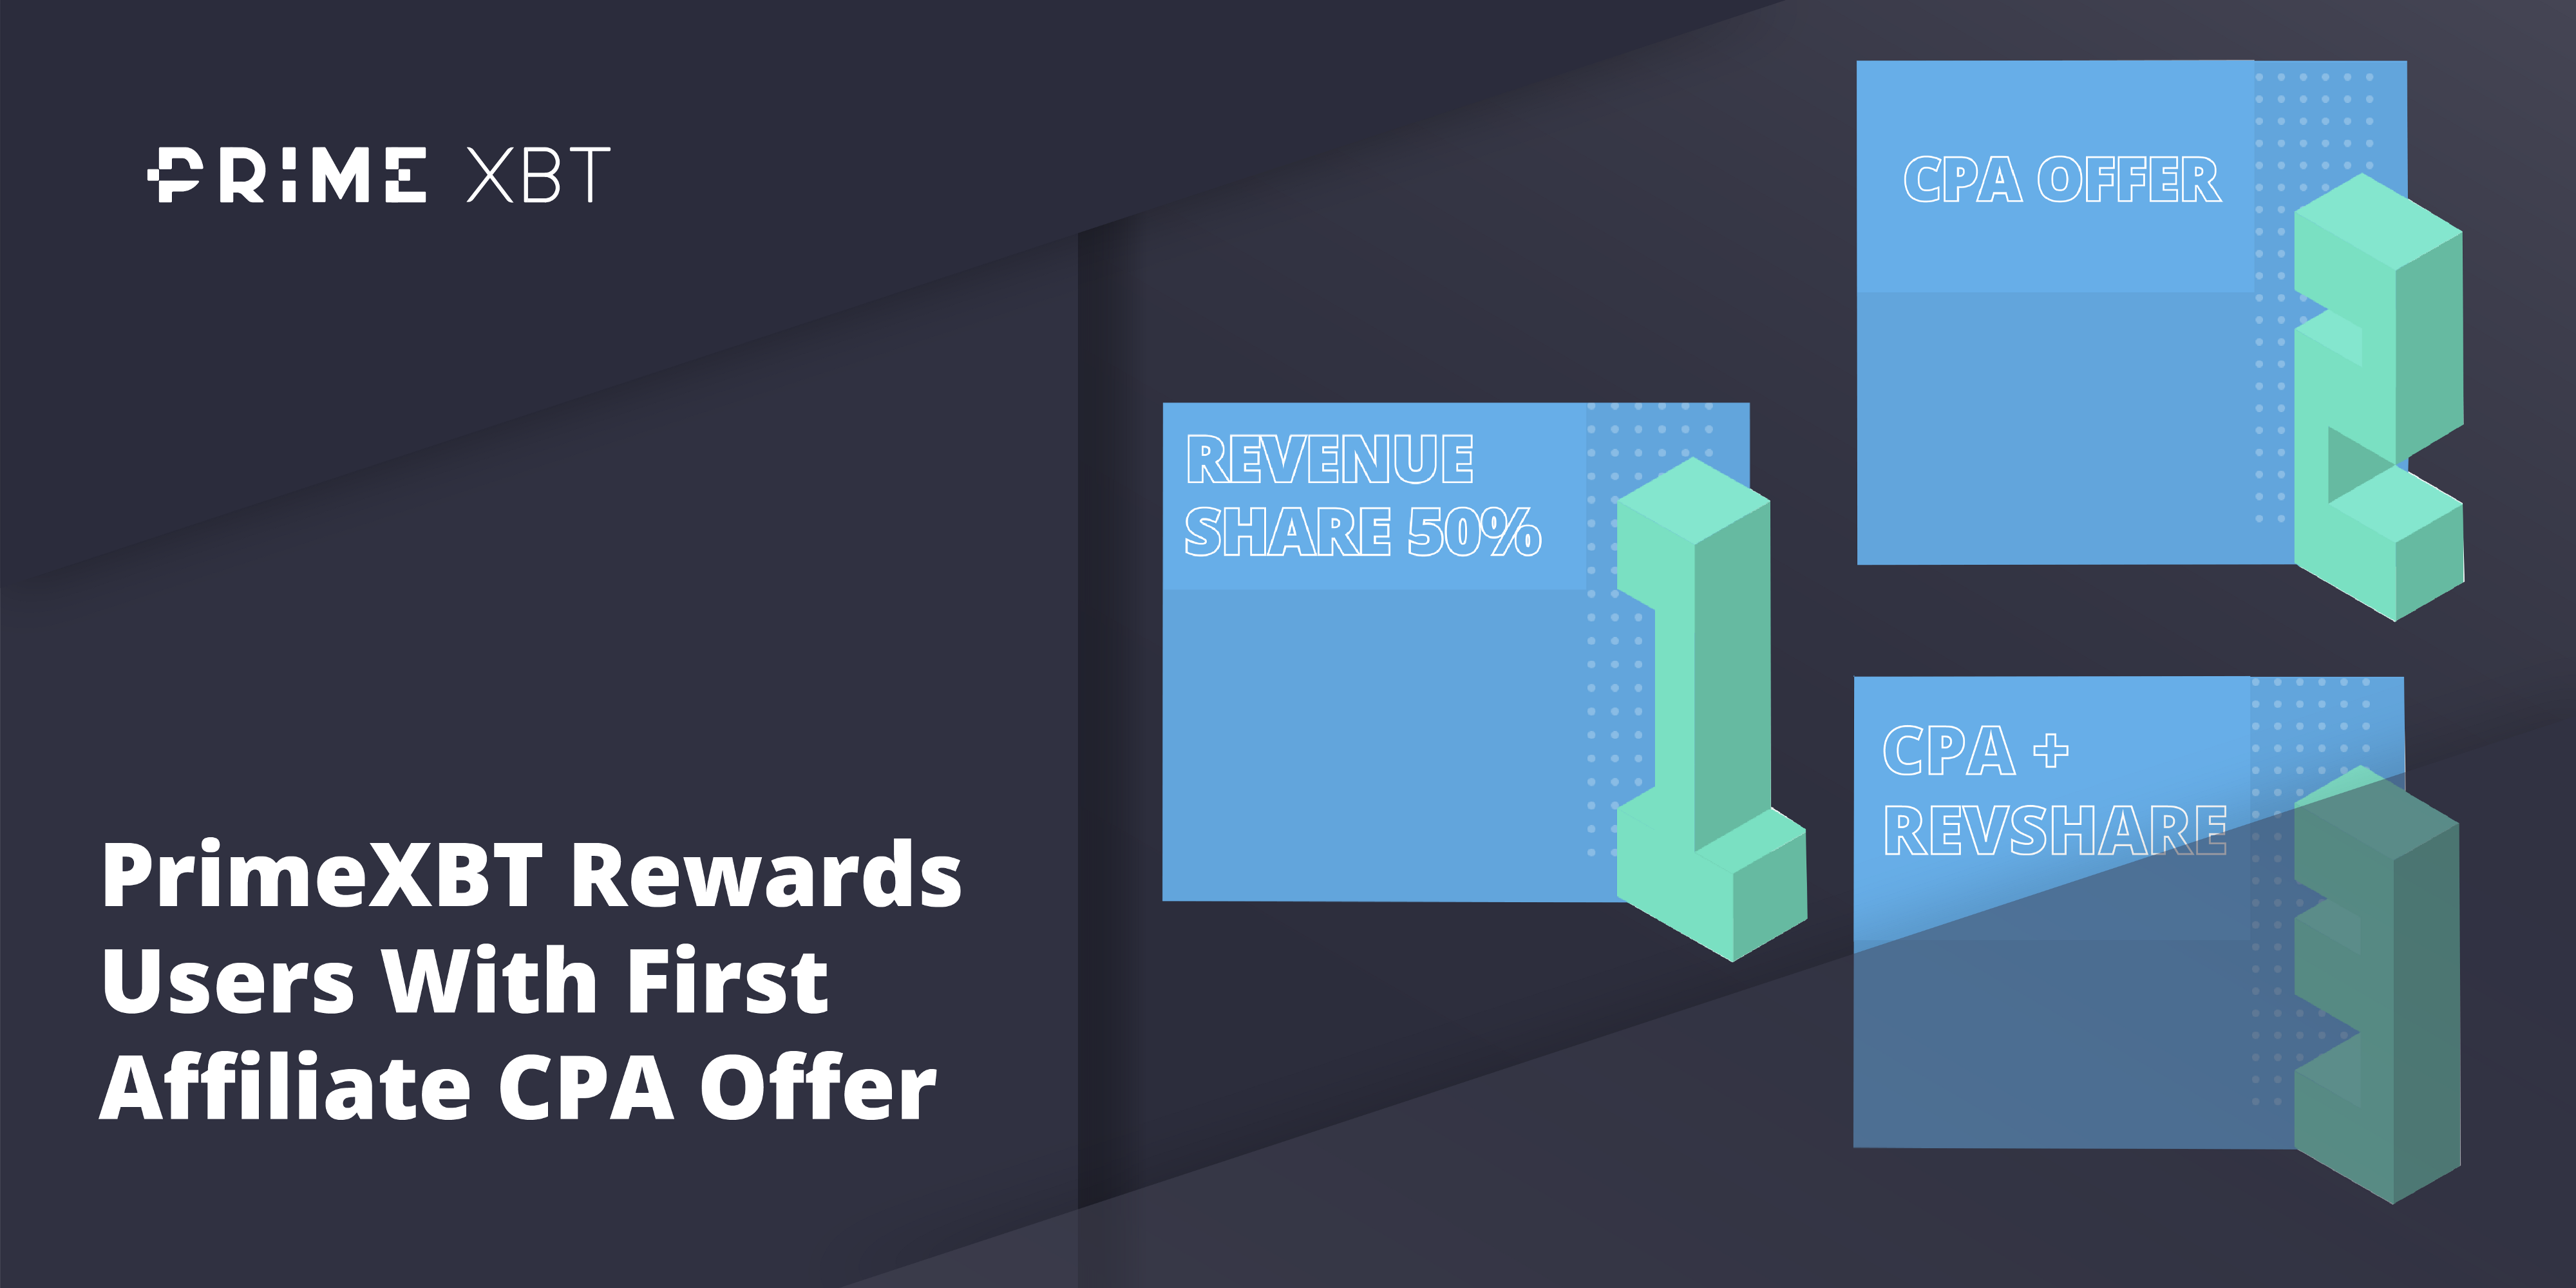 PrimeXBT Rewards Users With First Affiliate CPA Offer - 31.10.19 Blog Rewards